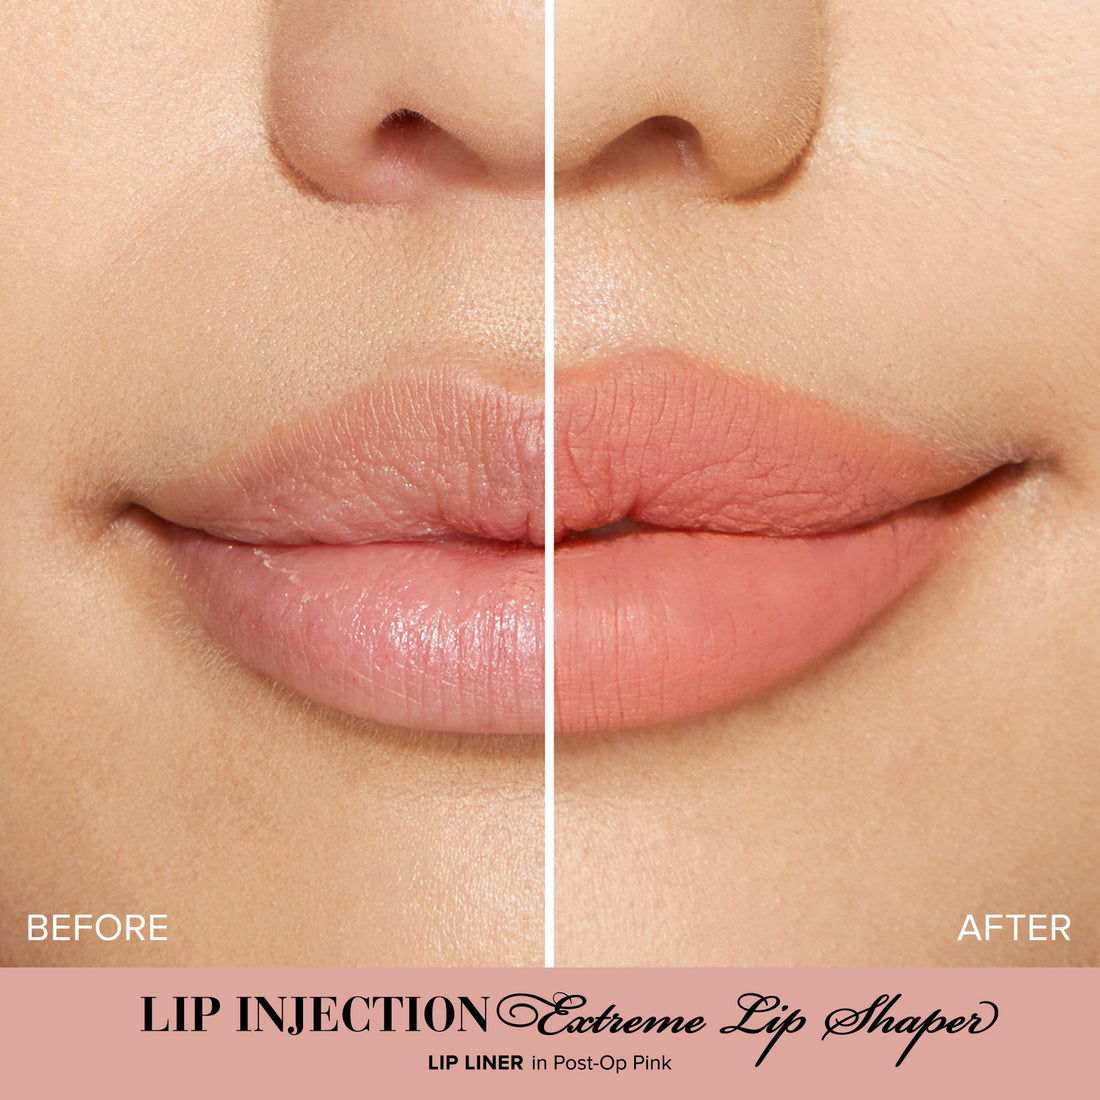 Lip Injection Extreme Lip Shaper/ Post-Op Pink  - Too Faced.